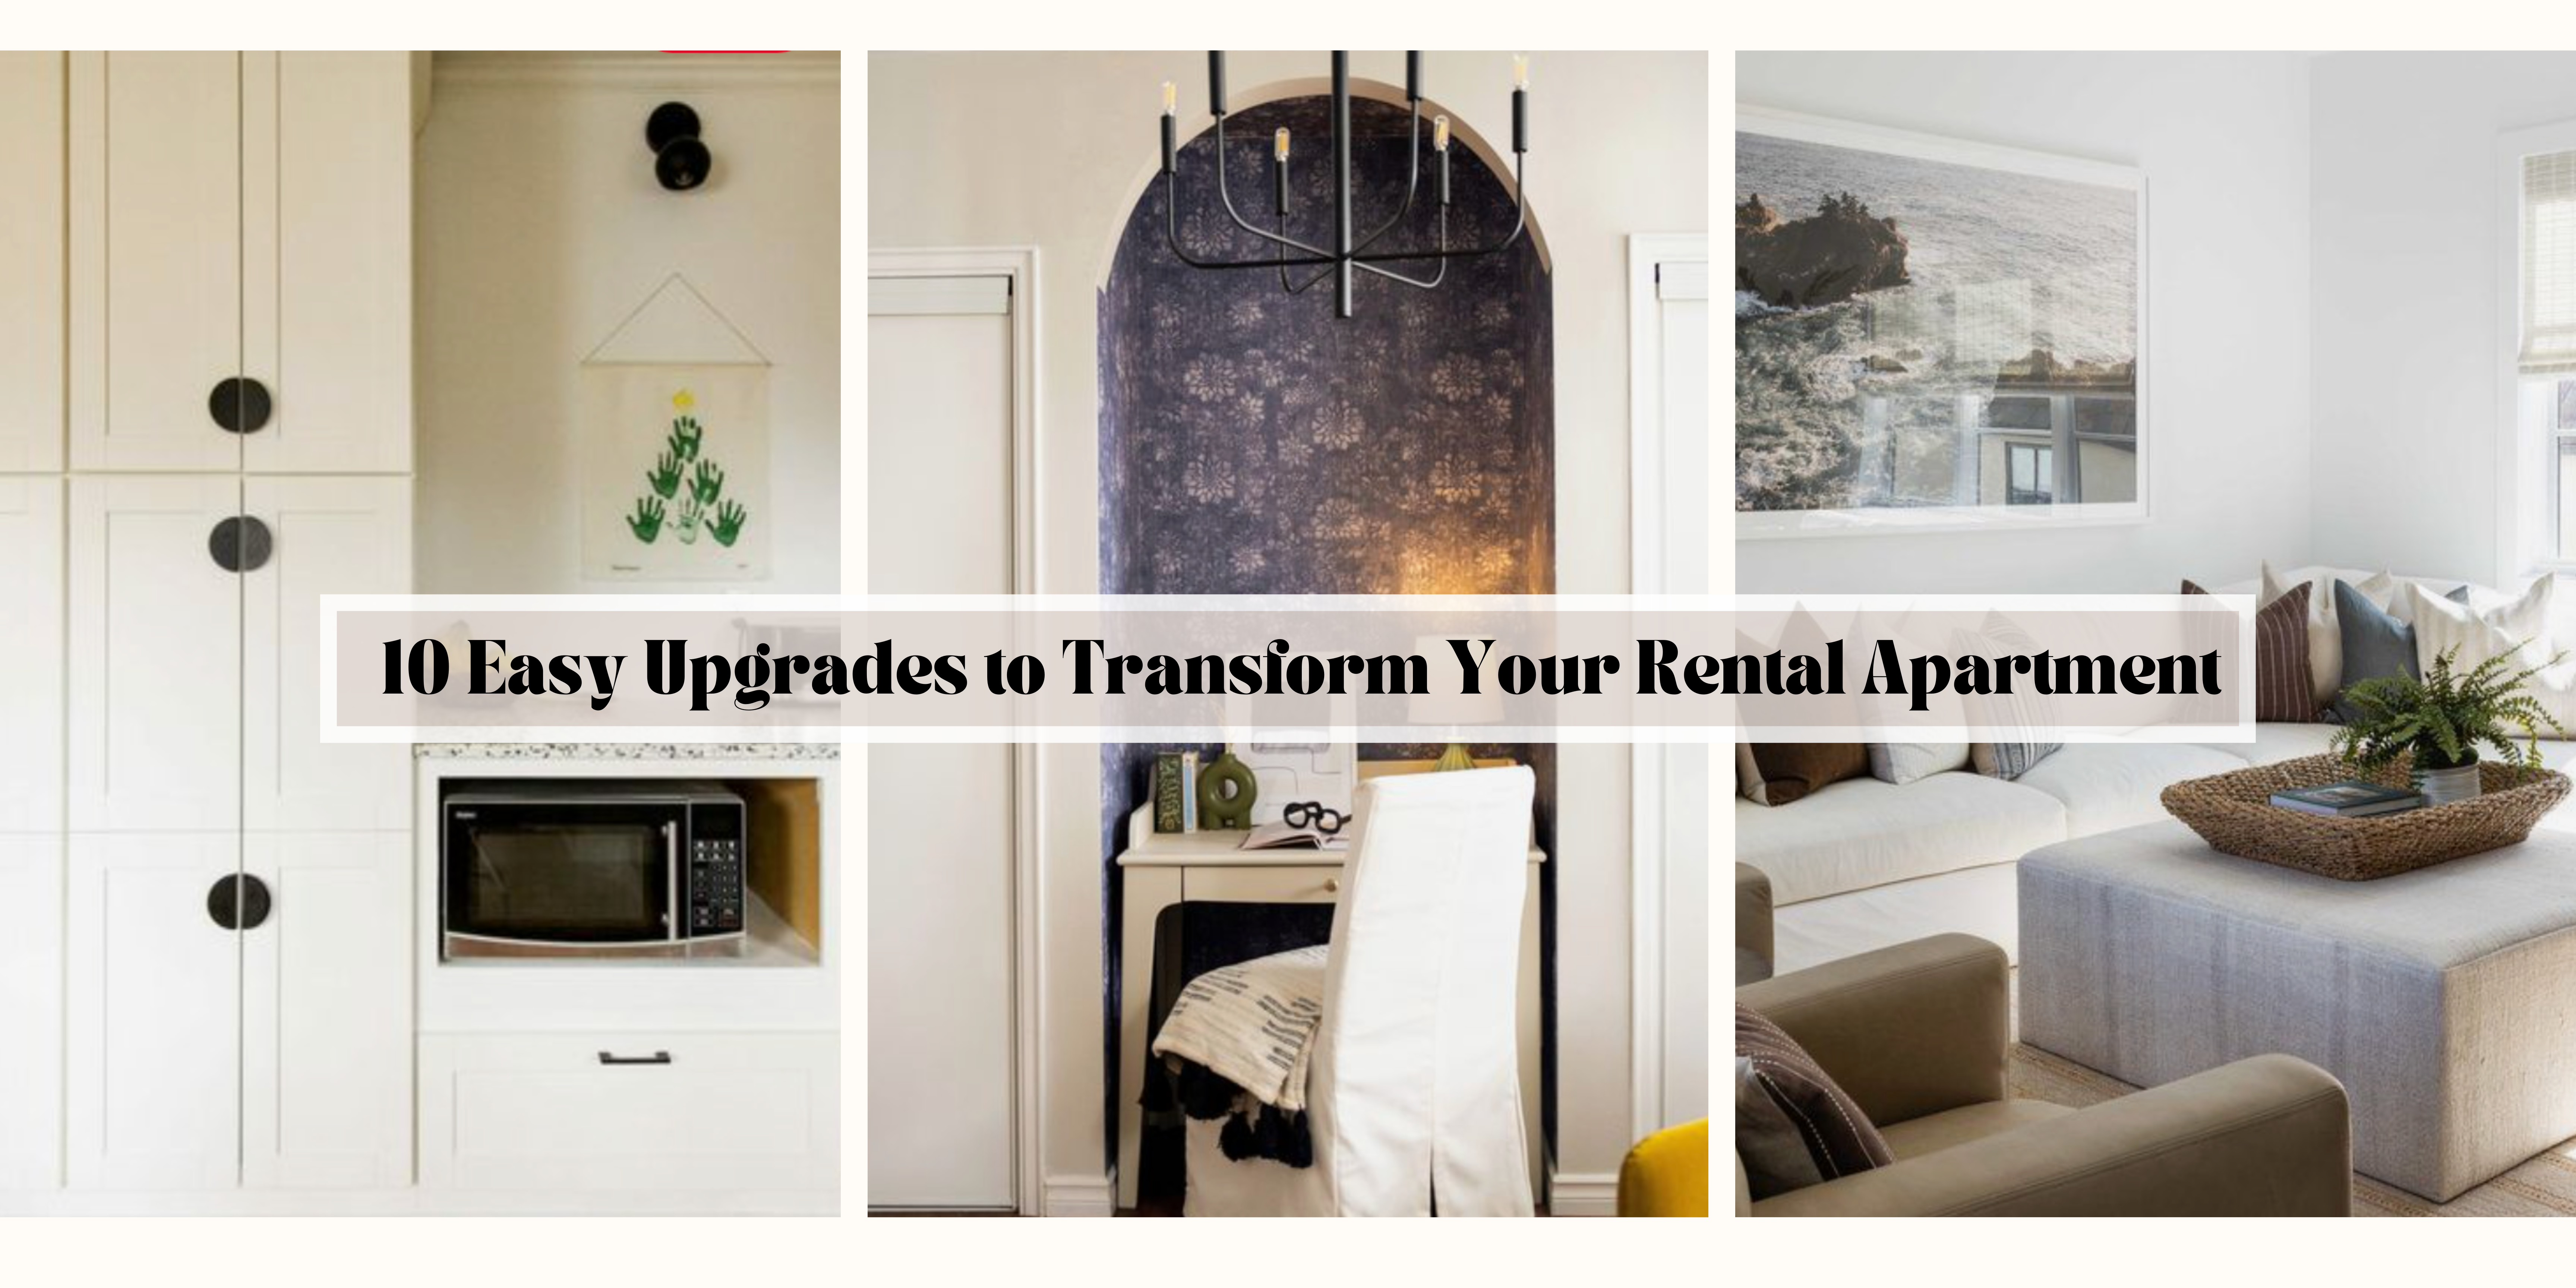 upgrades to transform your rental apartment